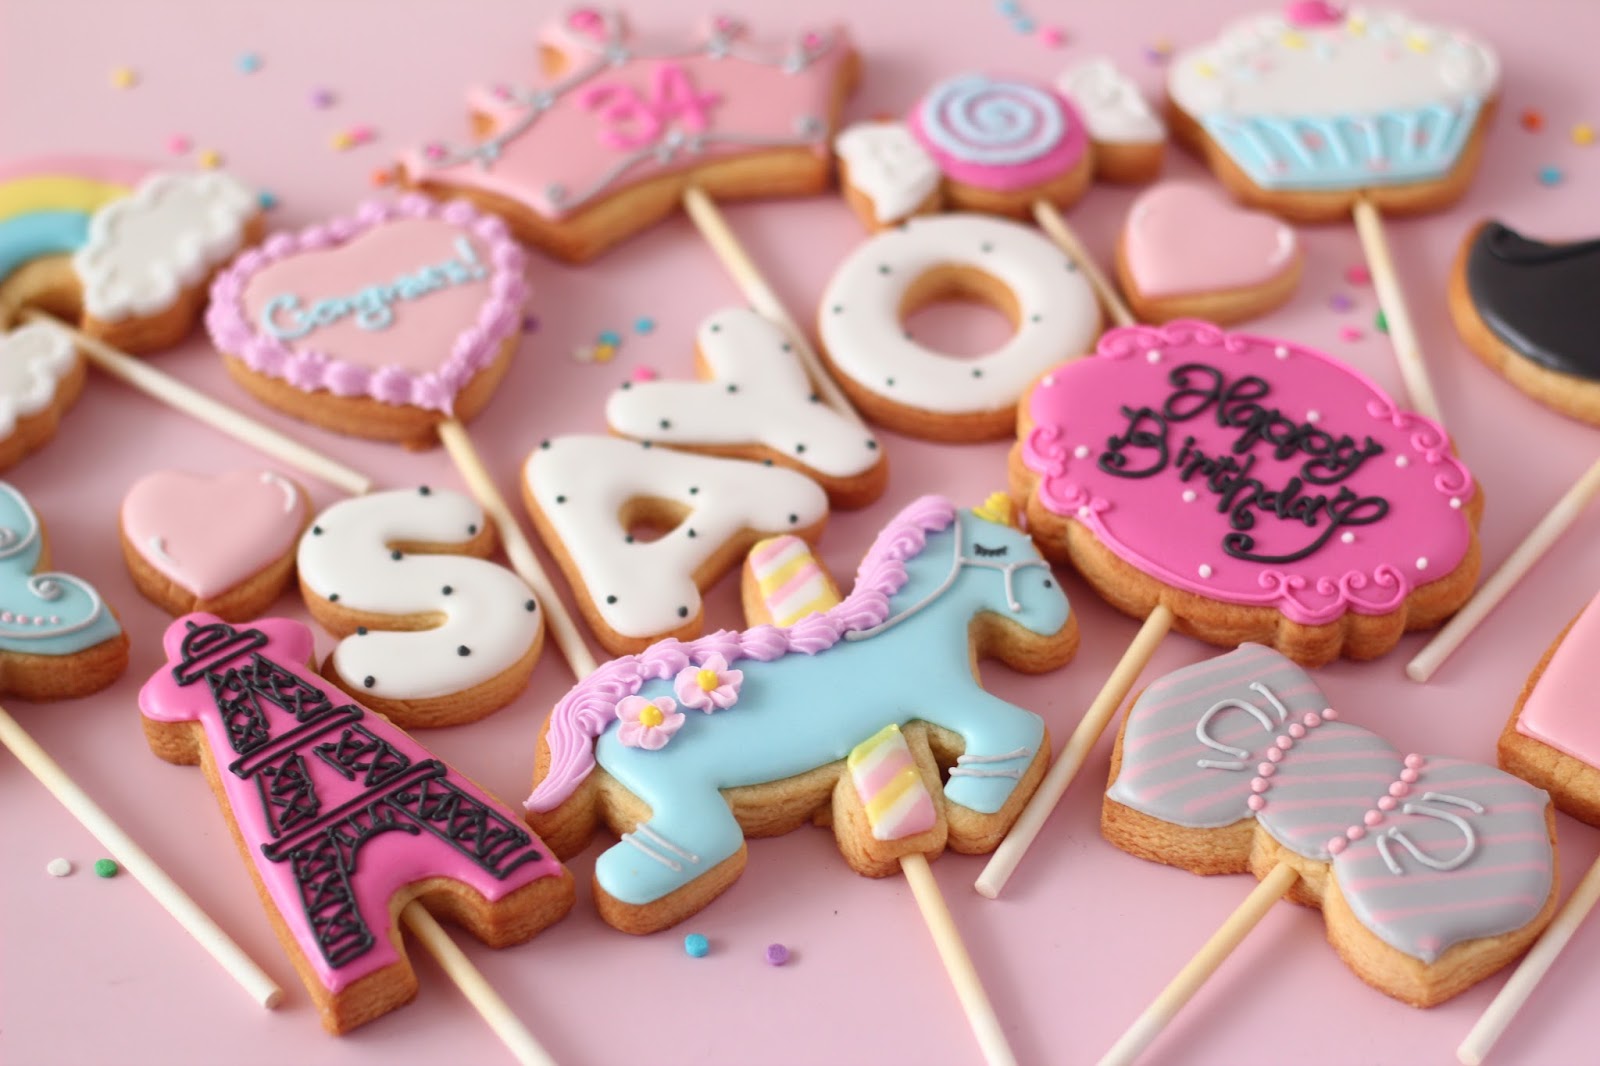 Sweeten your day.: icing cookies! 2 アイシングクッキーいろいろ2